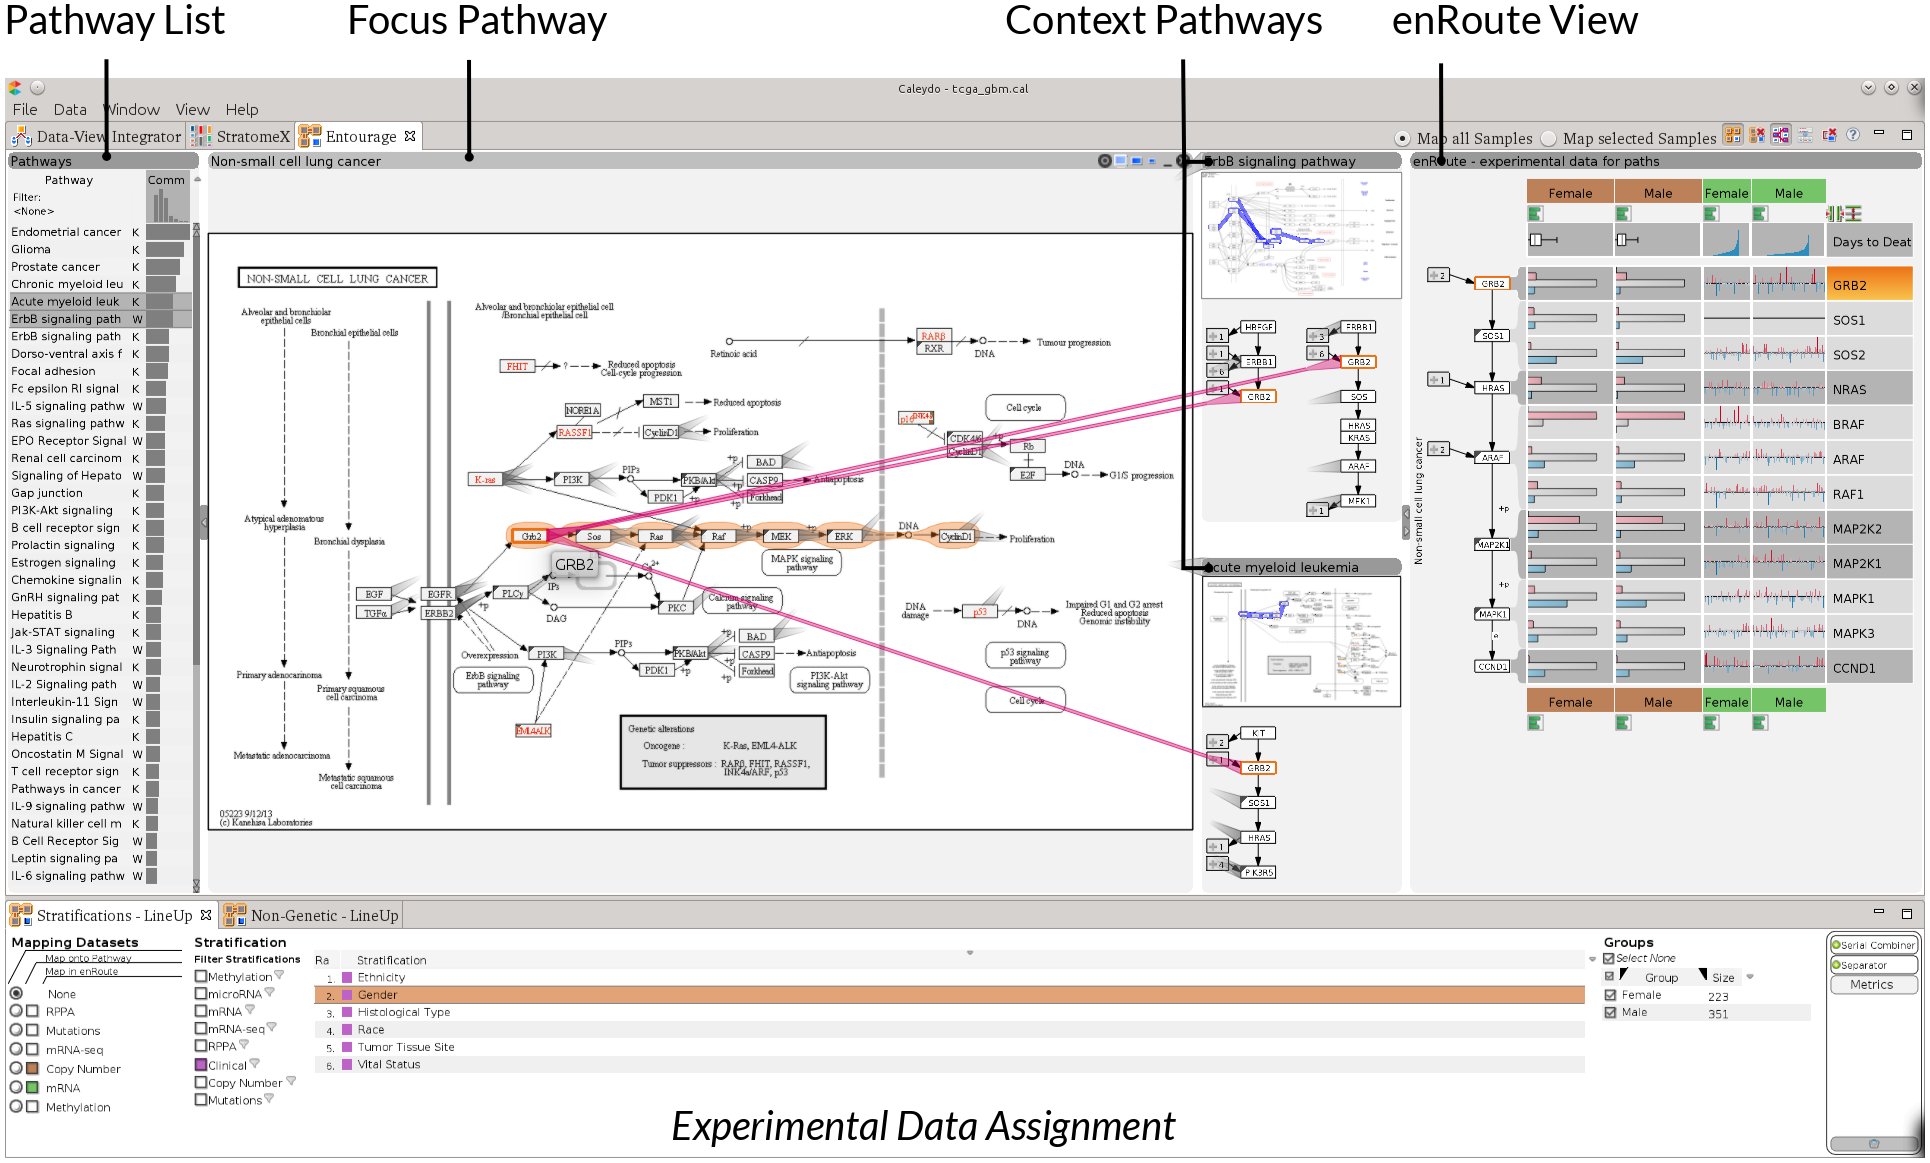 Pathway Visualizations Overview